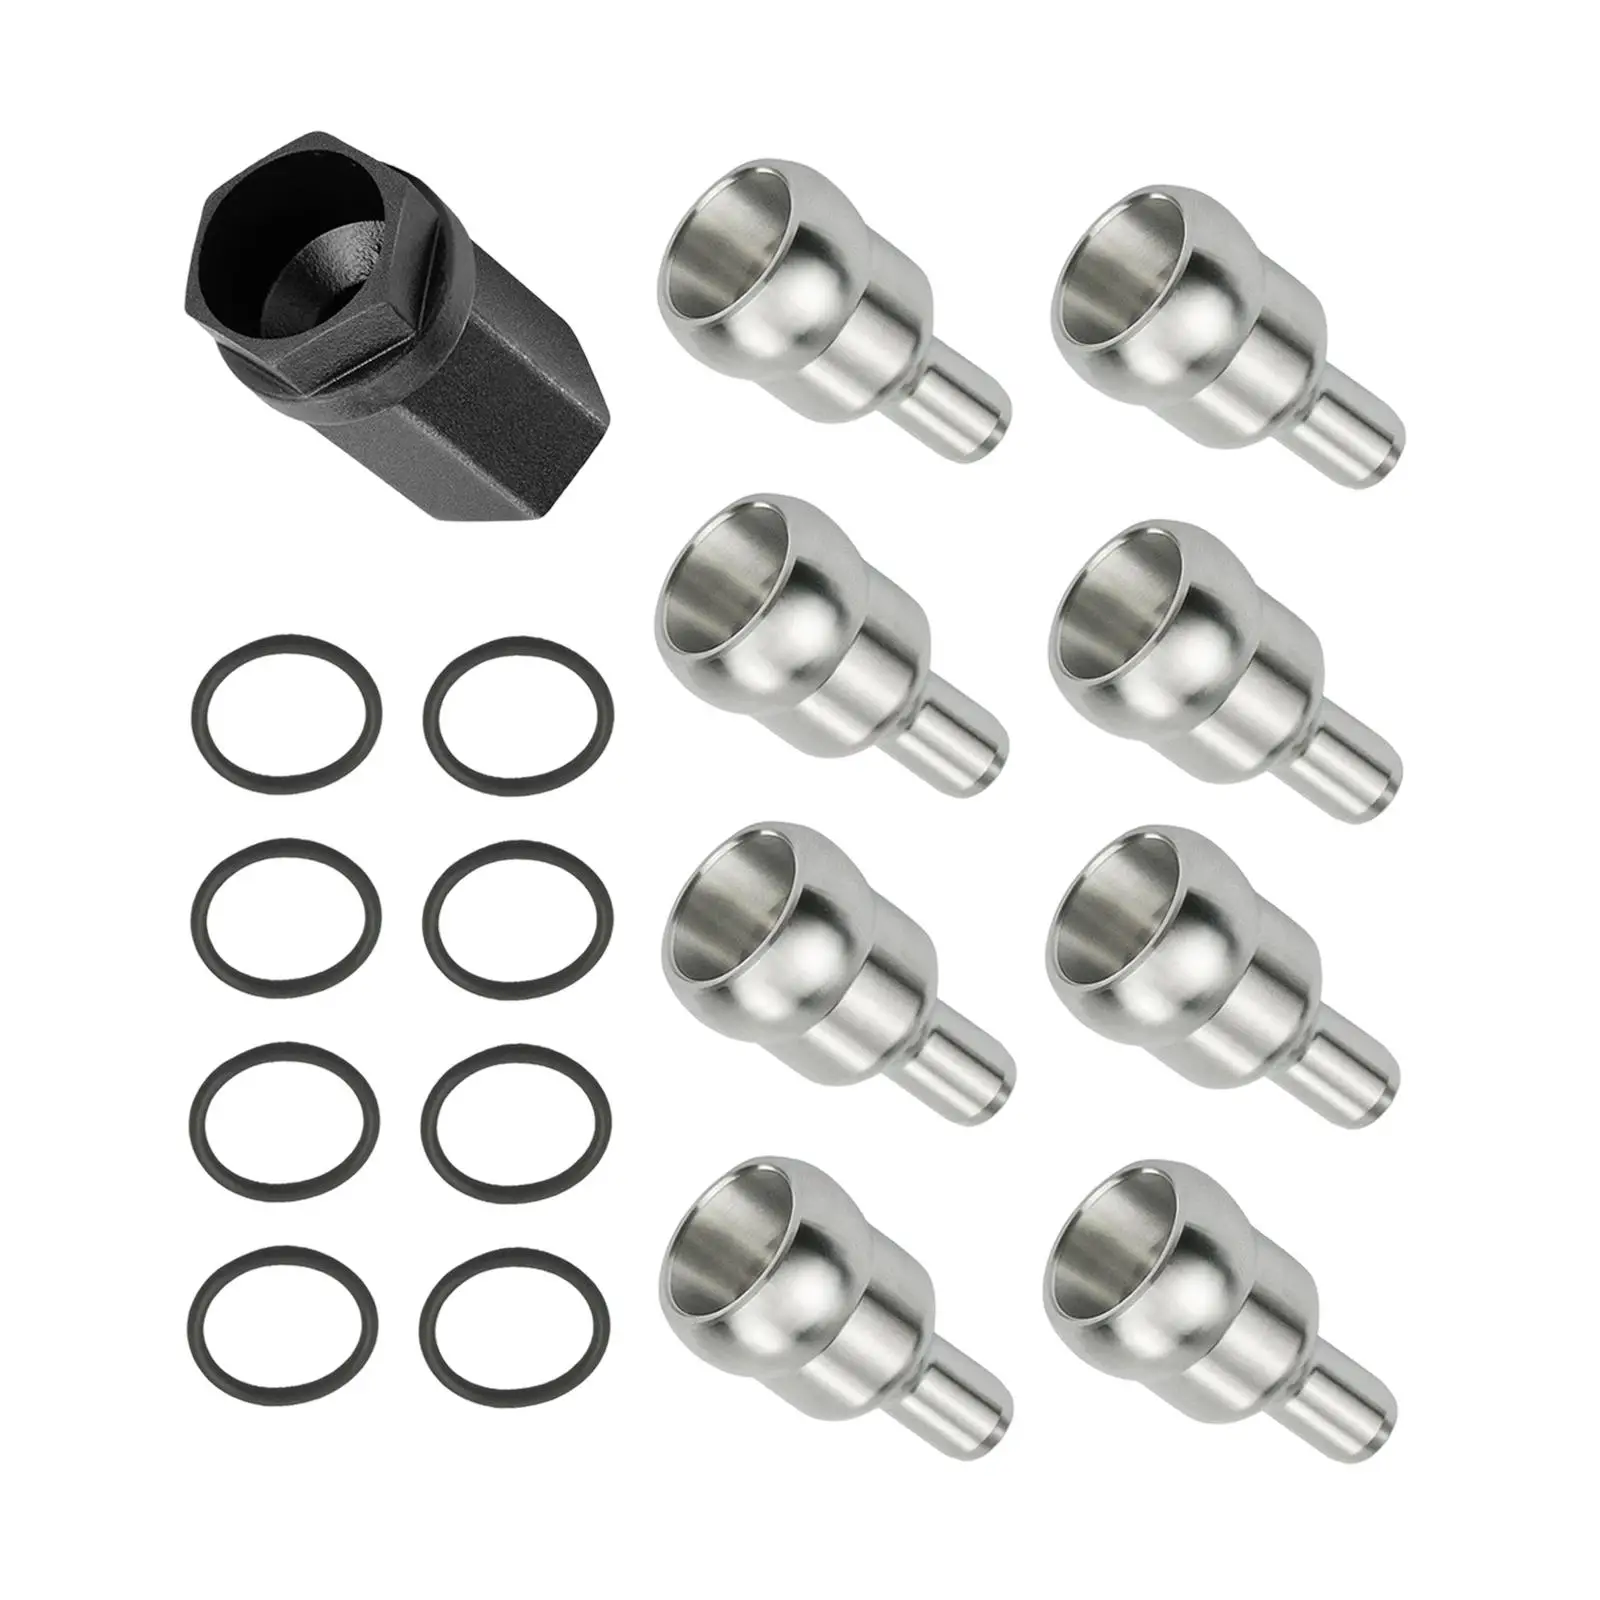  Cup,  8x s, 8x Seals, Repair Kits, for 6.0L High  Durable Accessories